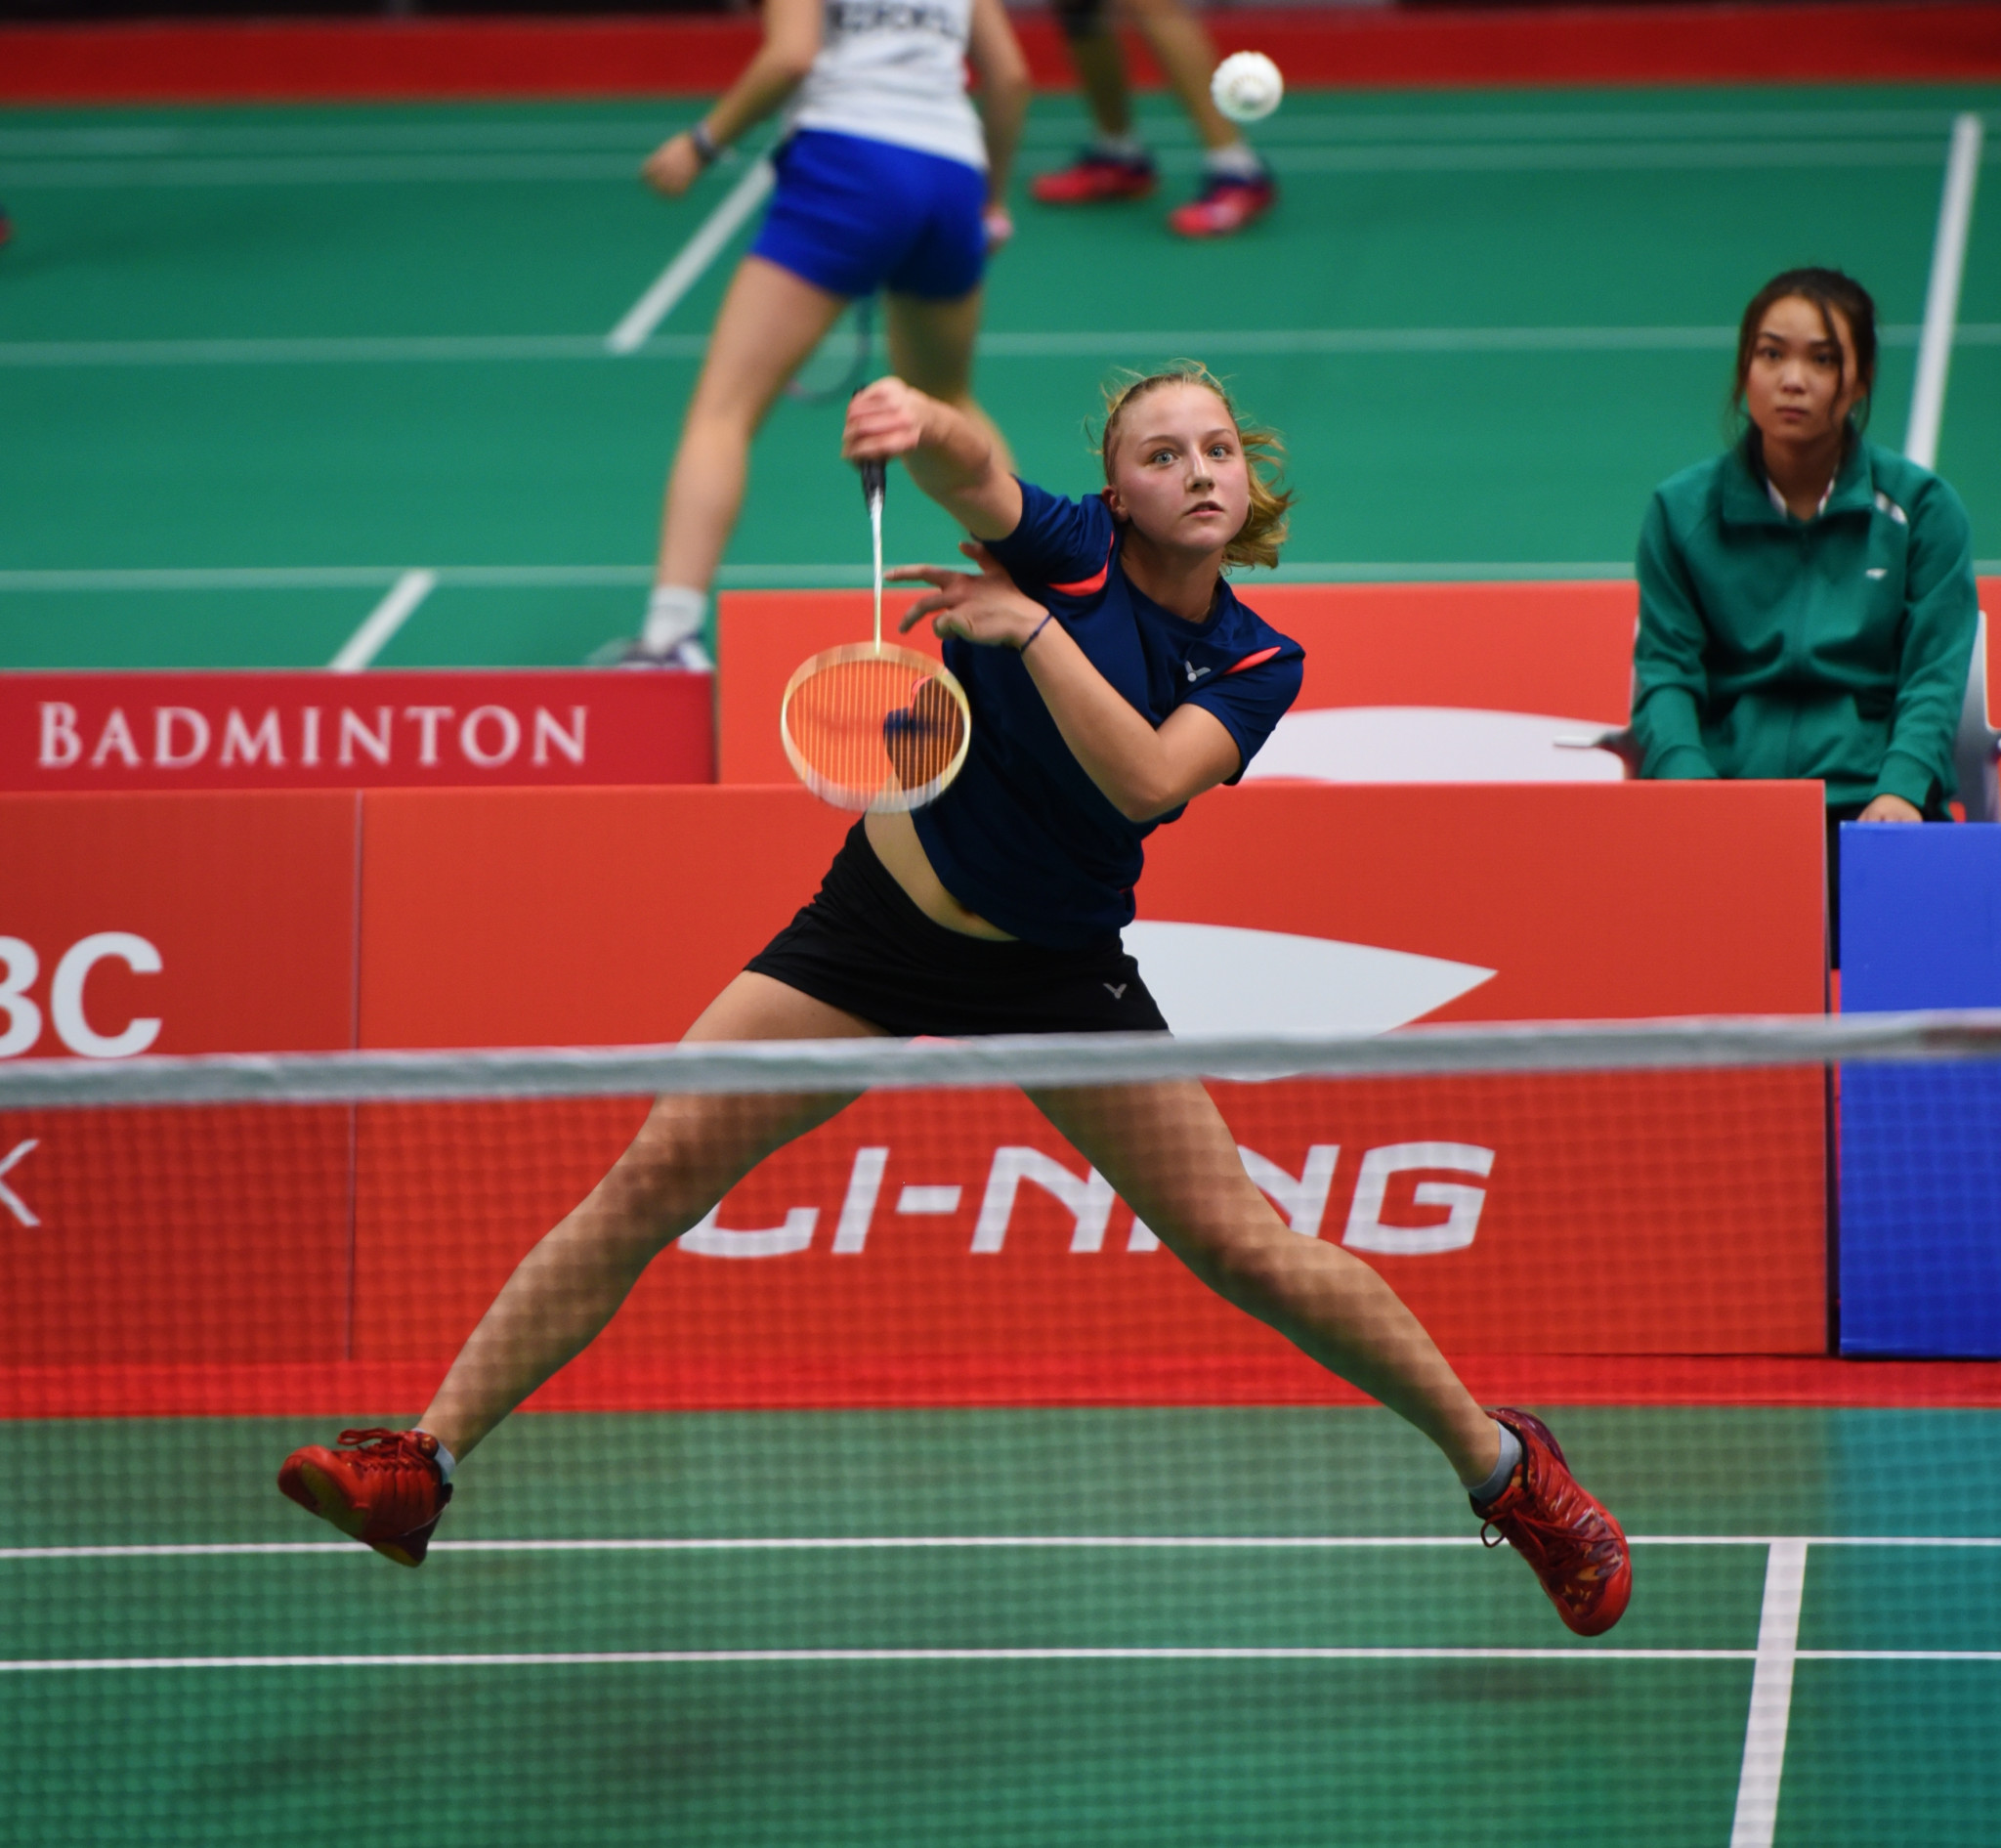 In all, 36 teams are taking part in the competition ©Badminton Canada